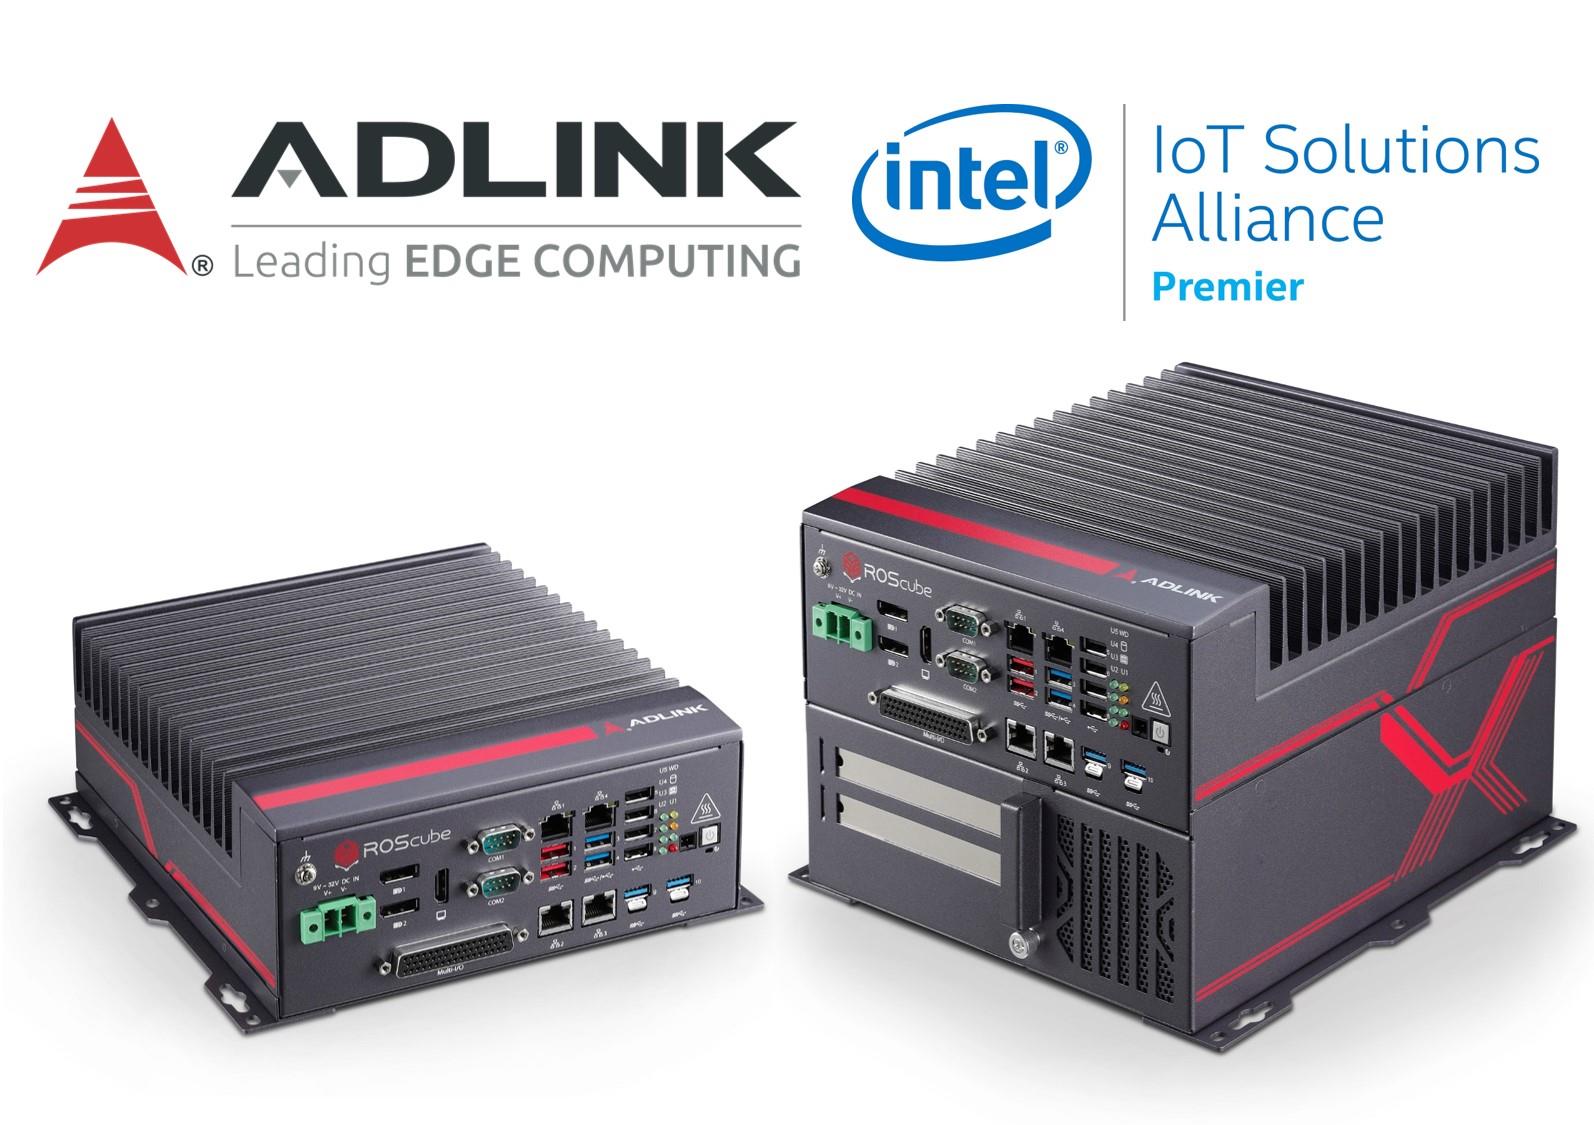 ADLINK Teams with Intel to Realize AI Robotics at the Edge